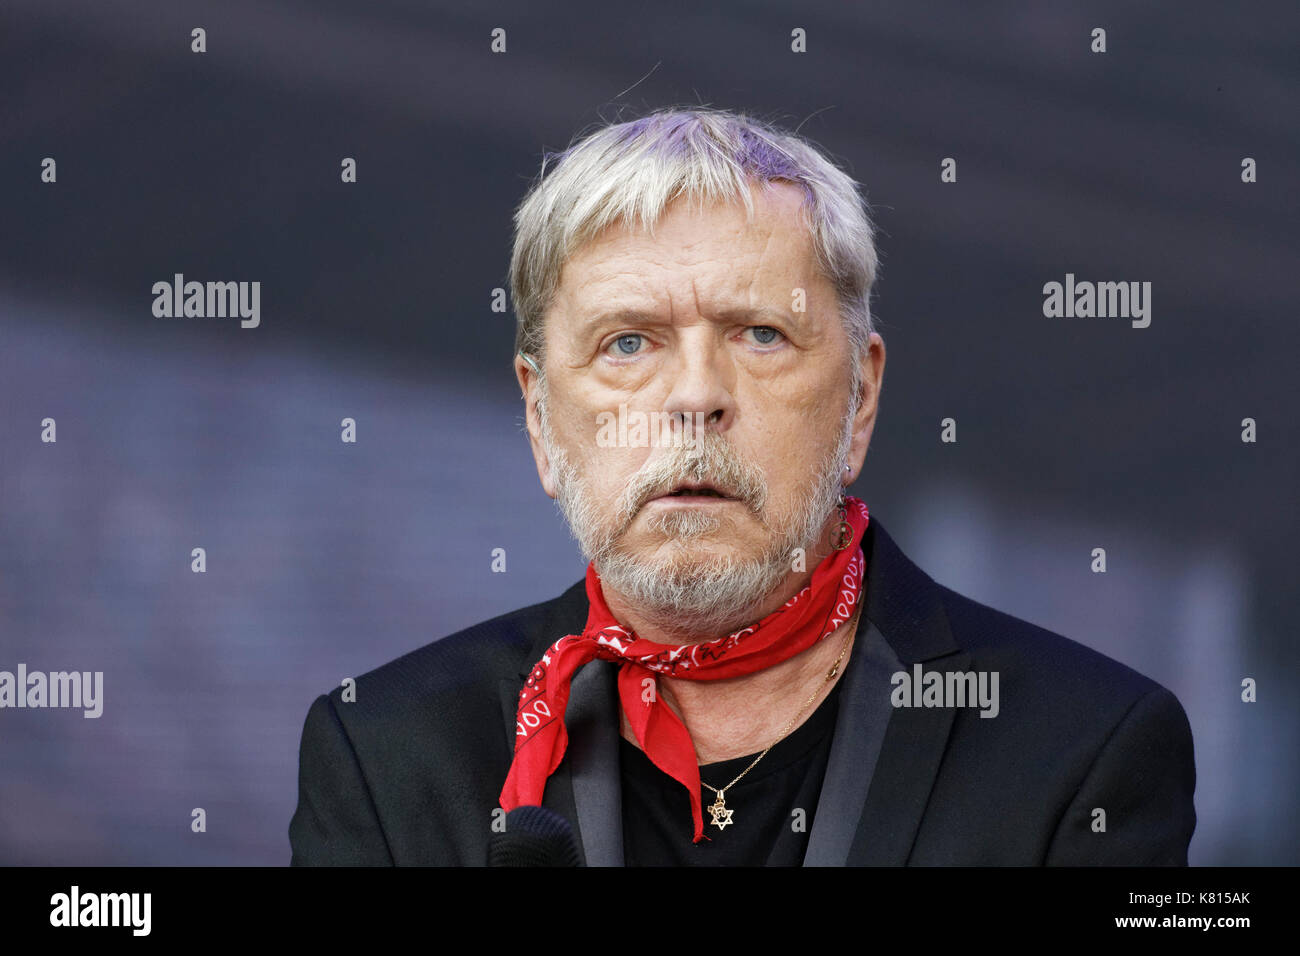 La Courneuve France 17th Sep 2017 Renaud Sechan Performs At The Stock Photo Alamy Renaud sechan is the author of comme un enfant perdu (4.07 avg rating, 59 ratings, 7 reviews), envoye special chez moi (3.86 avg rating, 7 ratings, 0 rev. alamy